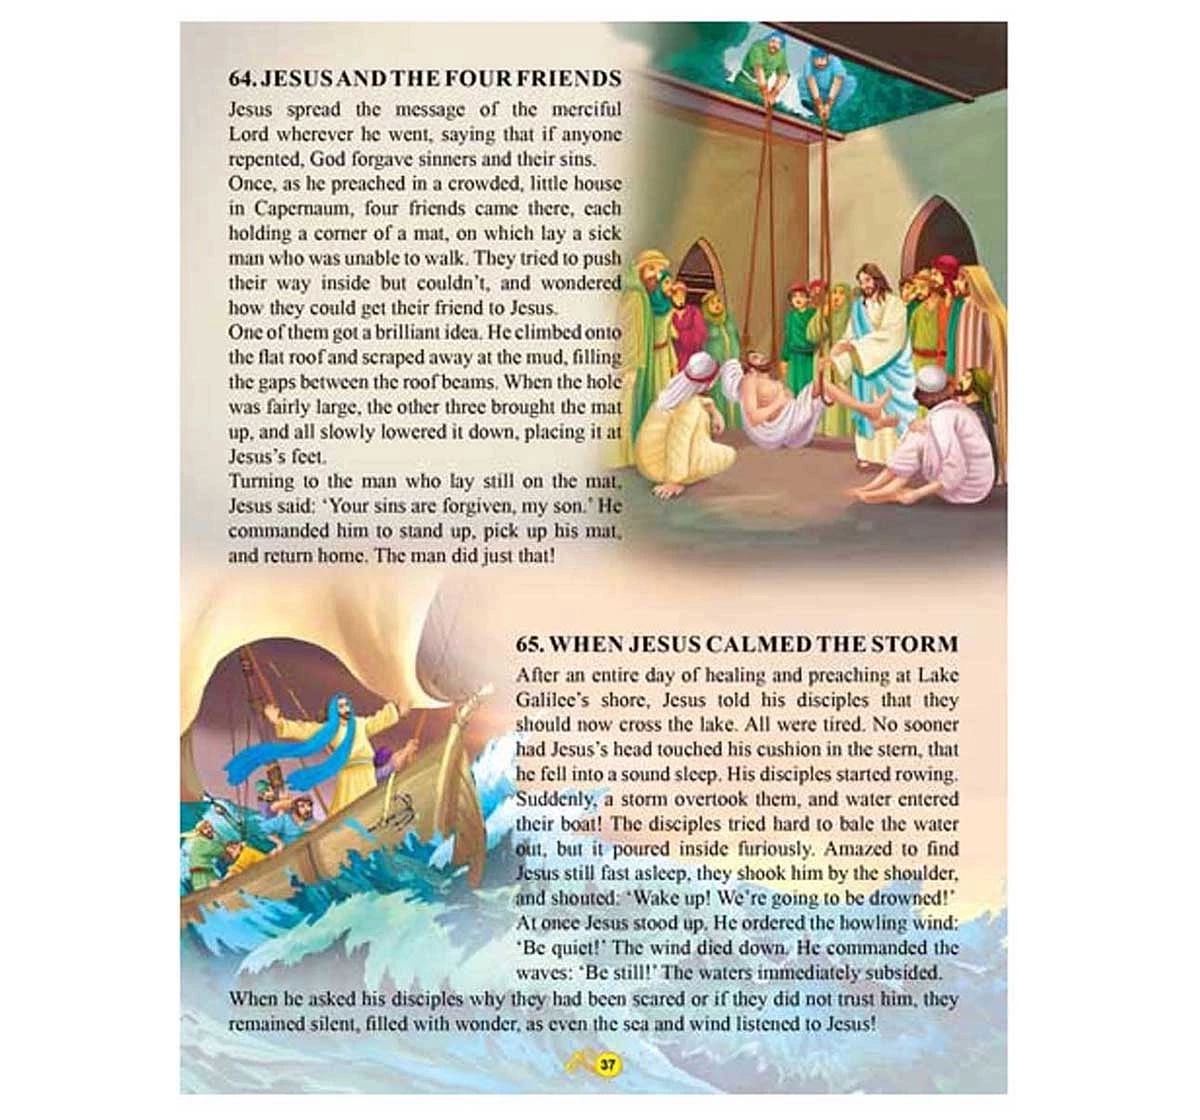 Dreamland Paper Back 101 Bible Stories Books for Kids 5Y+, Multicolour